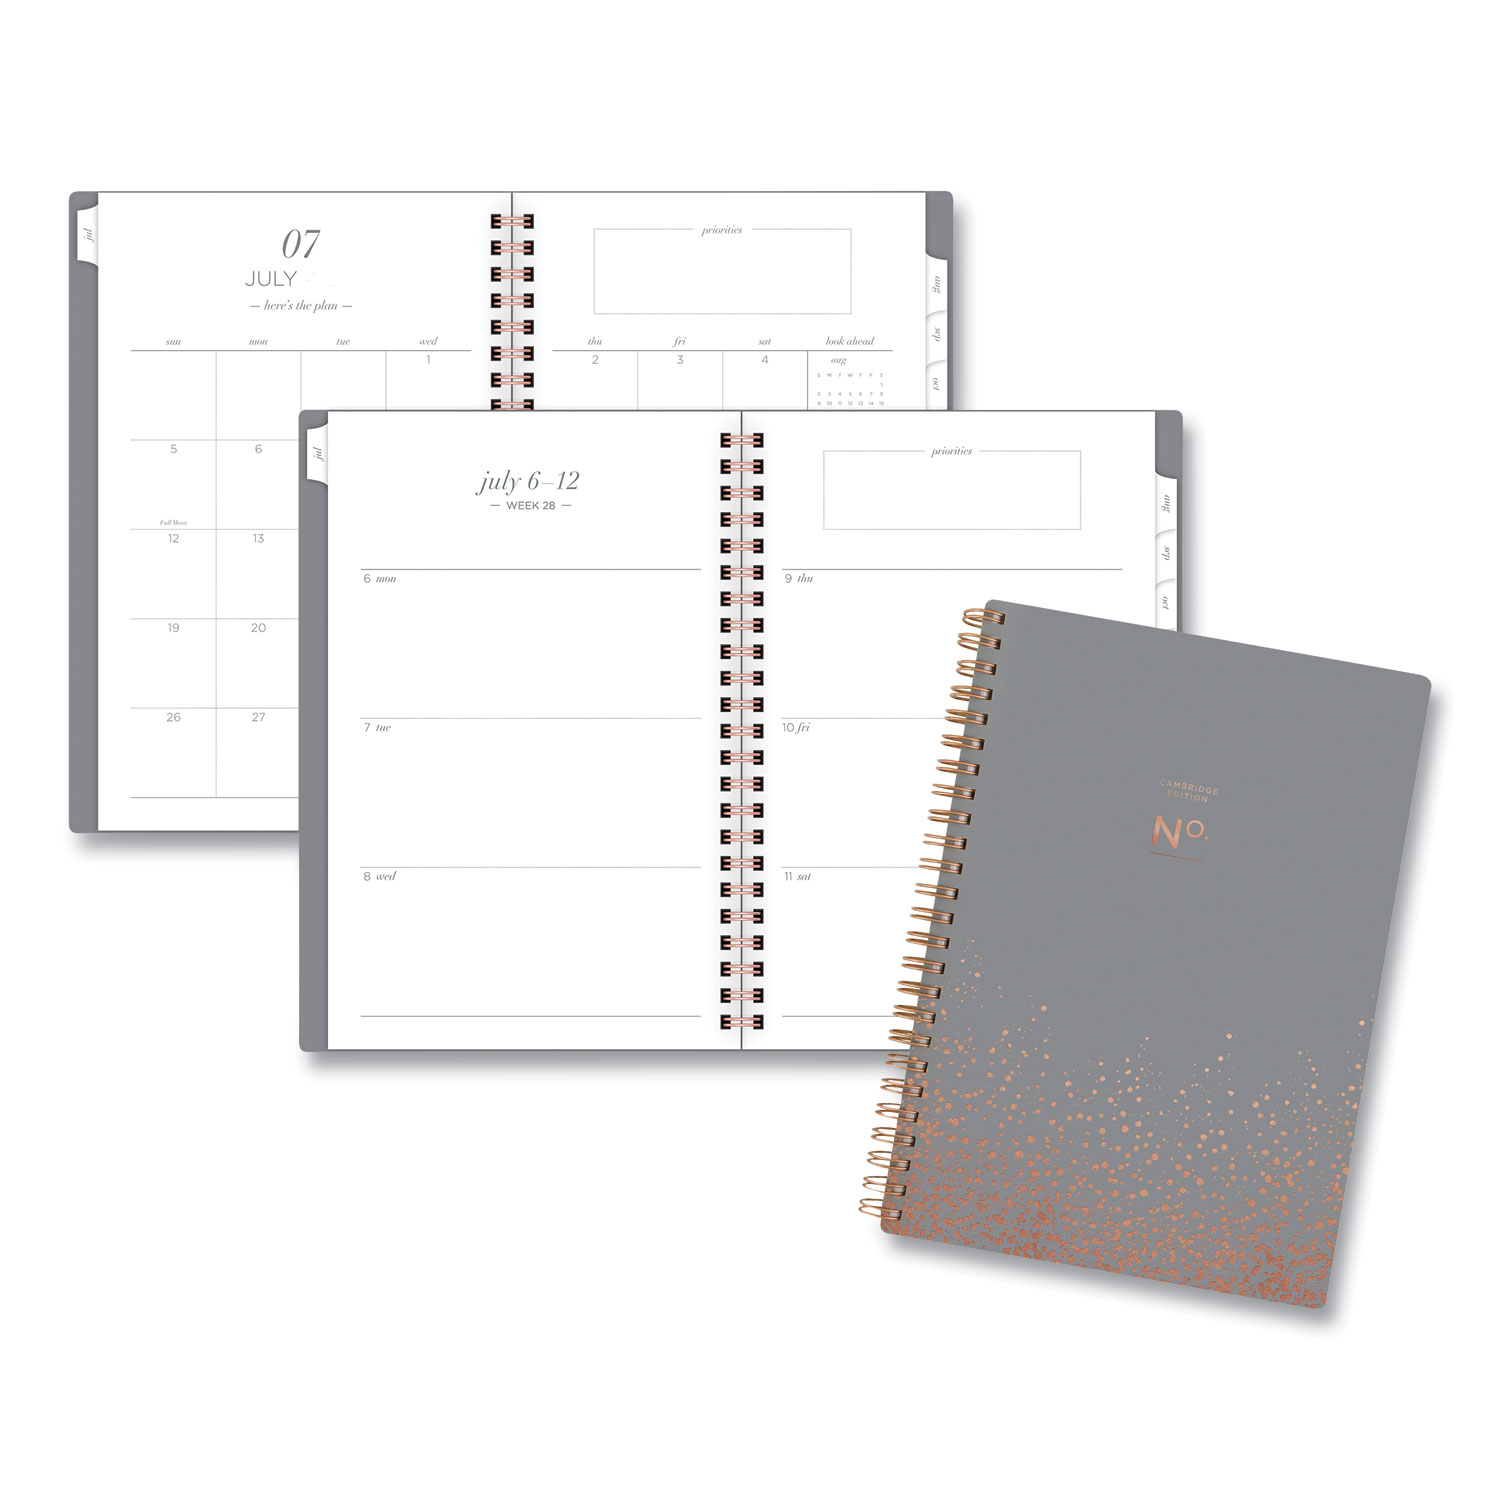  Cambridge 5442200A30 Workstyle Gold Dot Planner, 8.5 x 5.5, Gray, 2020-2021 (AAG5442200A30) 